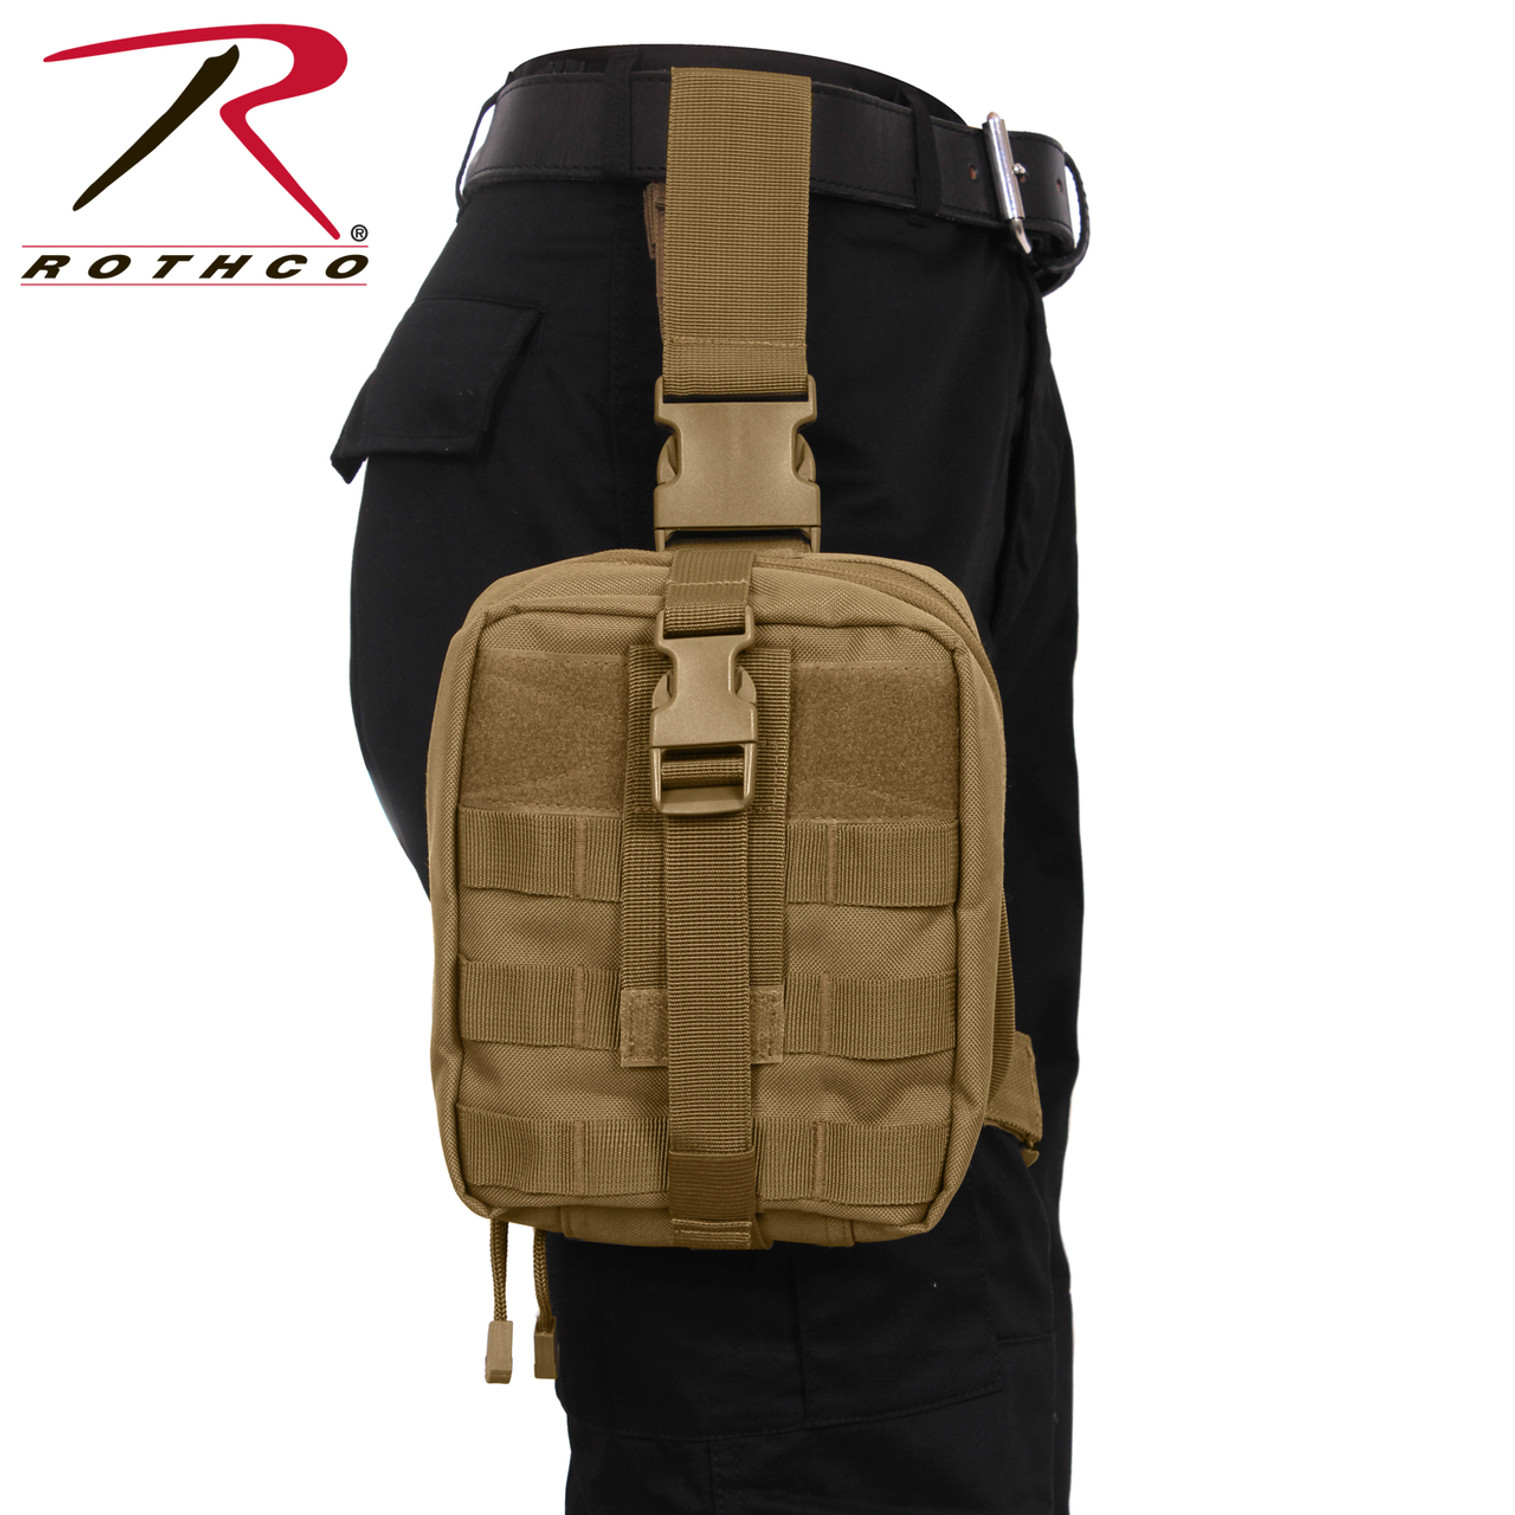 Rothco Drop Leg Medical Pouch - Coyote Brown